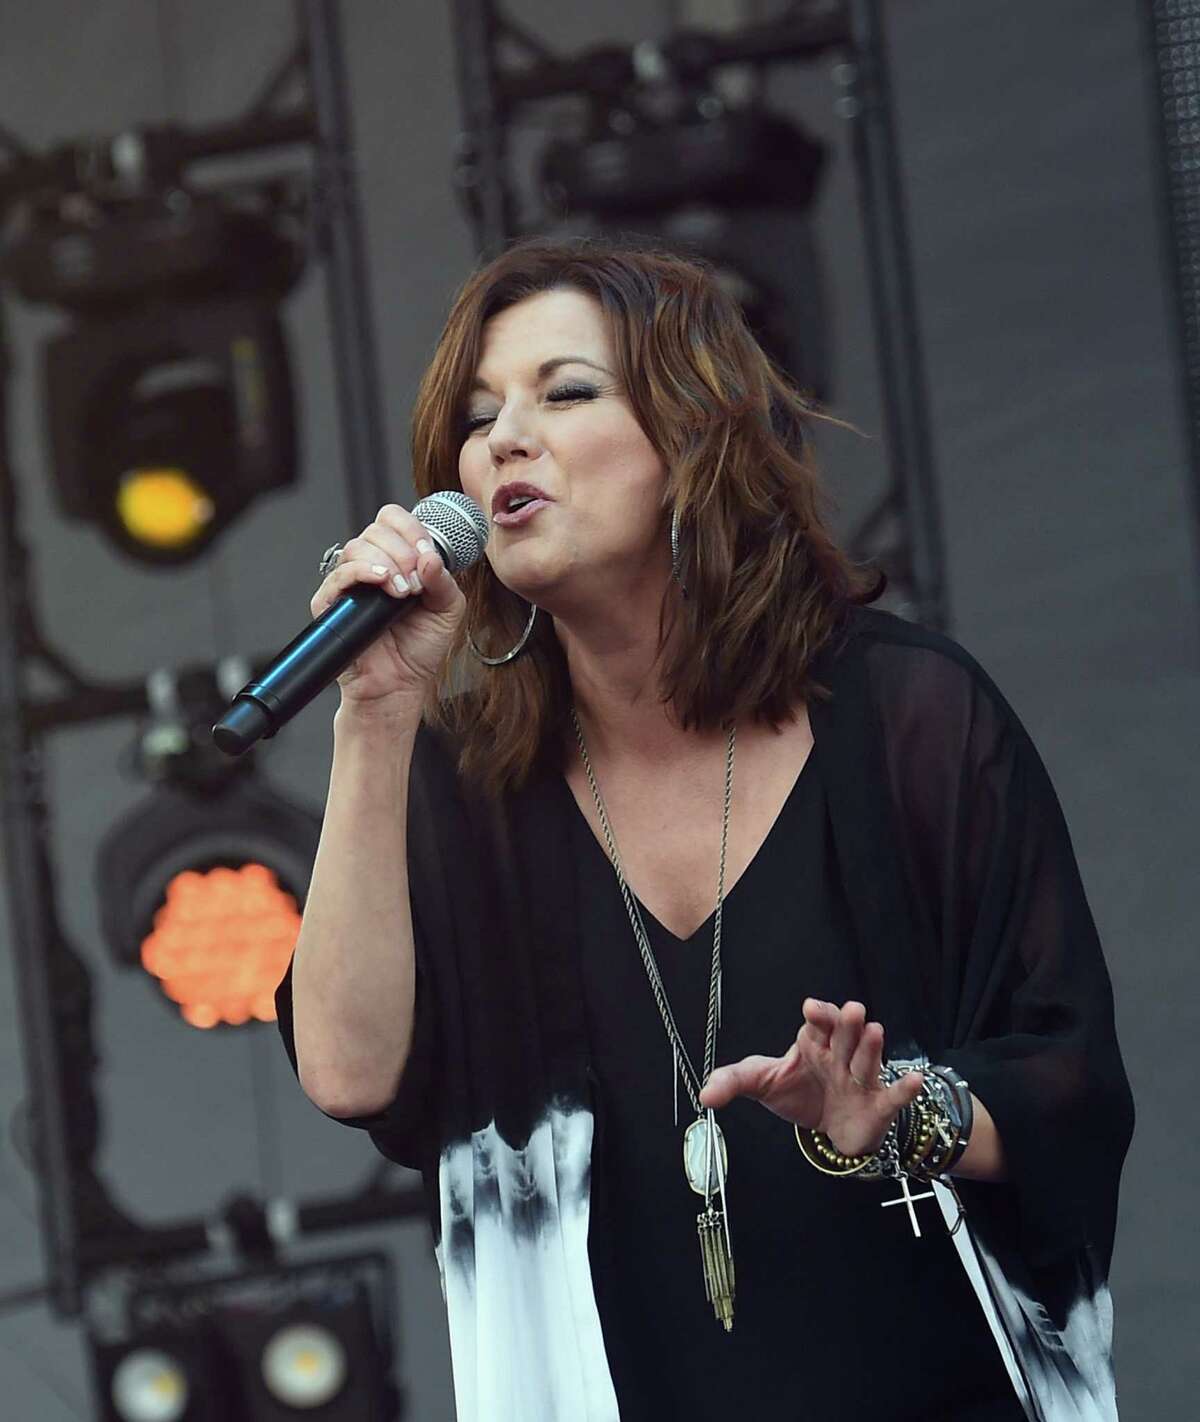 PHOTOS: Martina McBride announces Houston-area tour date  Martina McBride will perform at the Smart Financial Center in Sugar Land on Dec. 8 during her recently-announced Christmas tour.  >>> See more anticipated concerts in Houston this year in the slideshow 